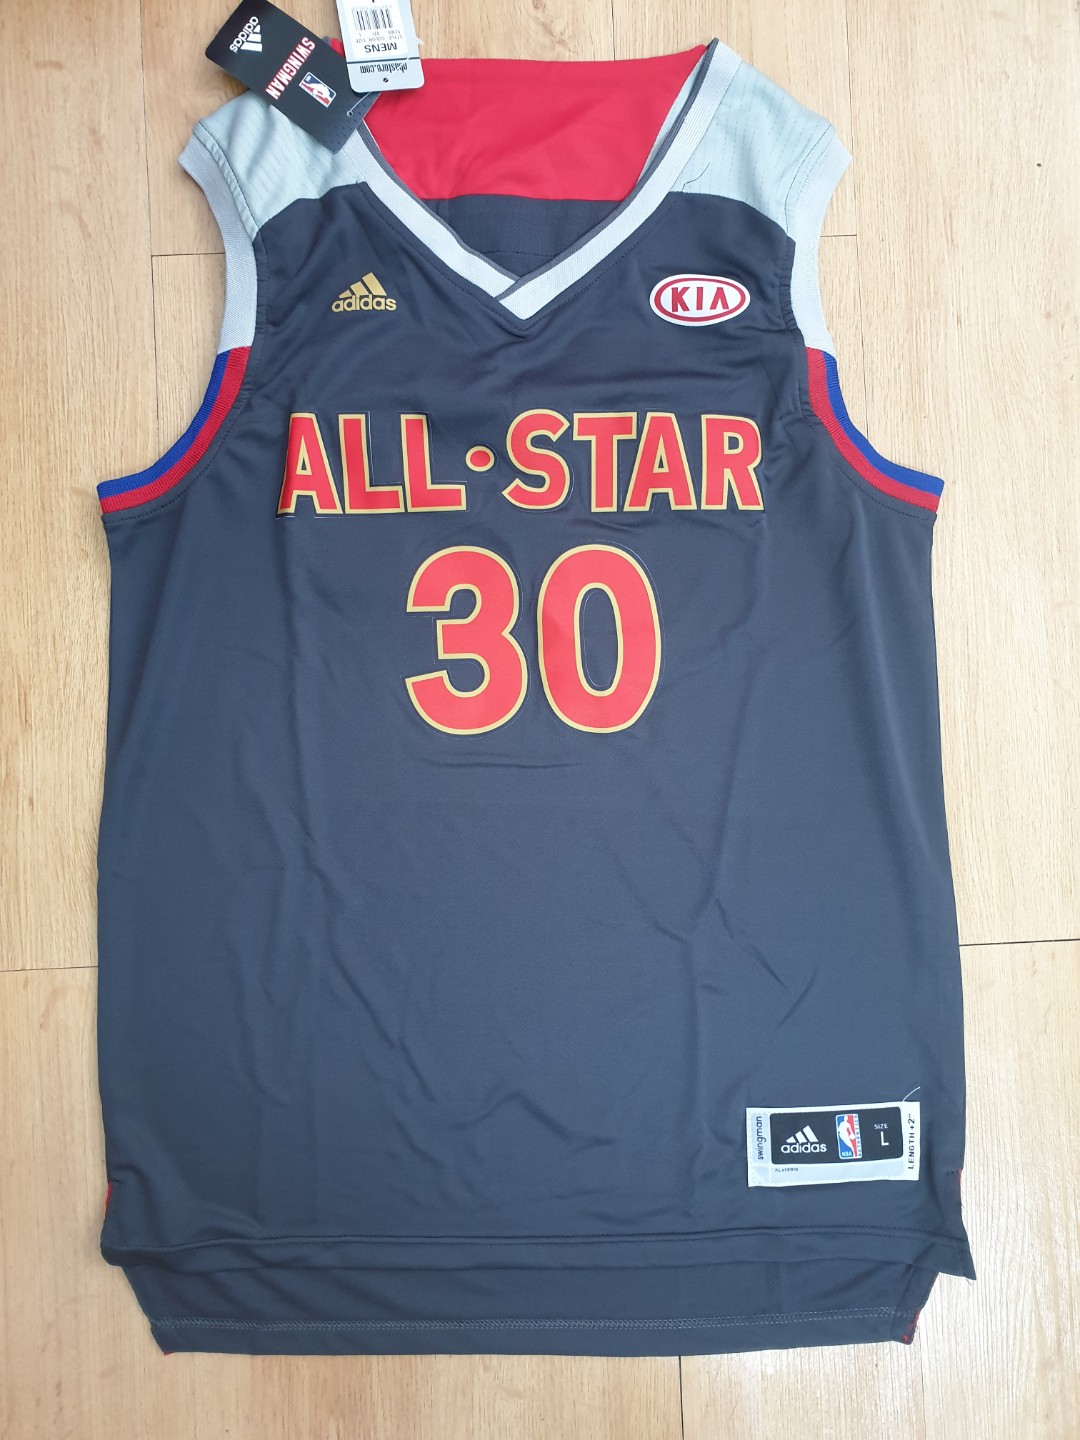 stephen curry west all star jersey